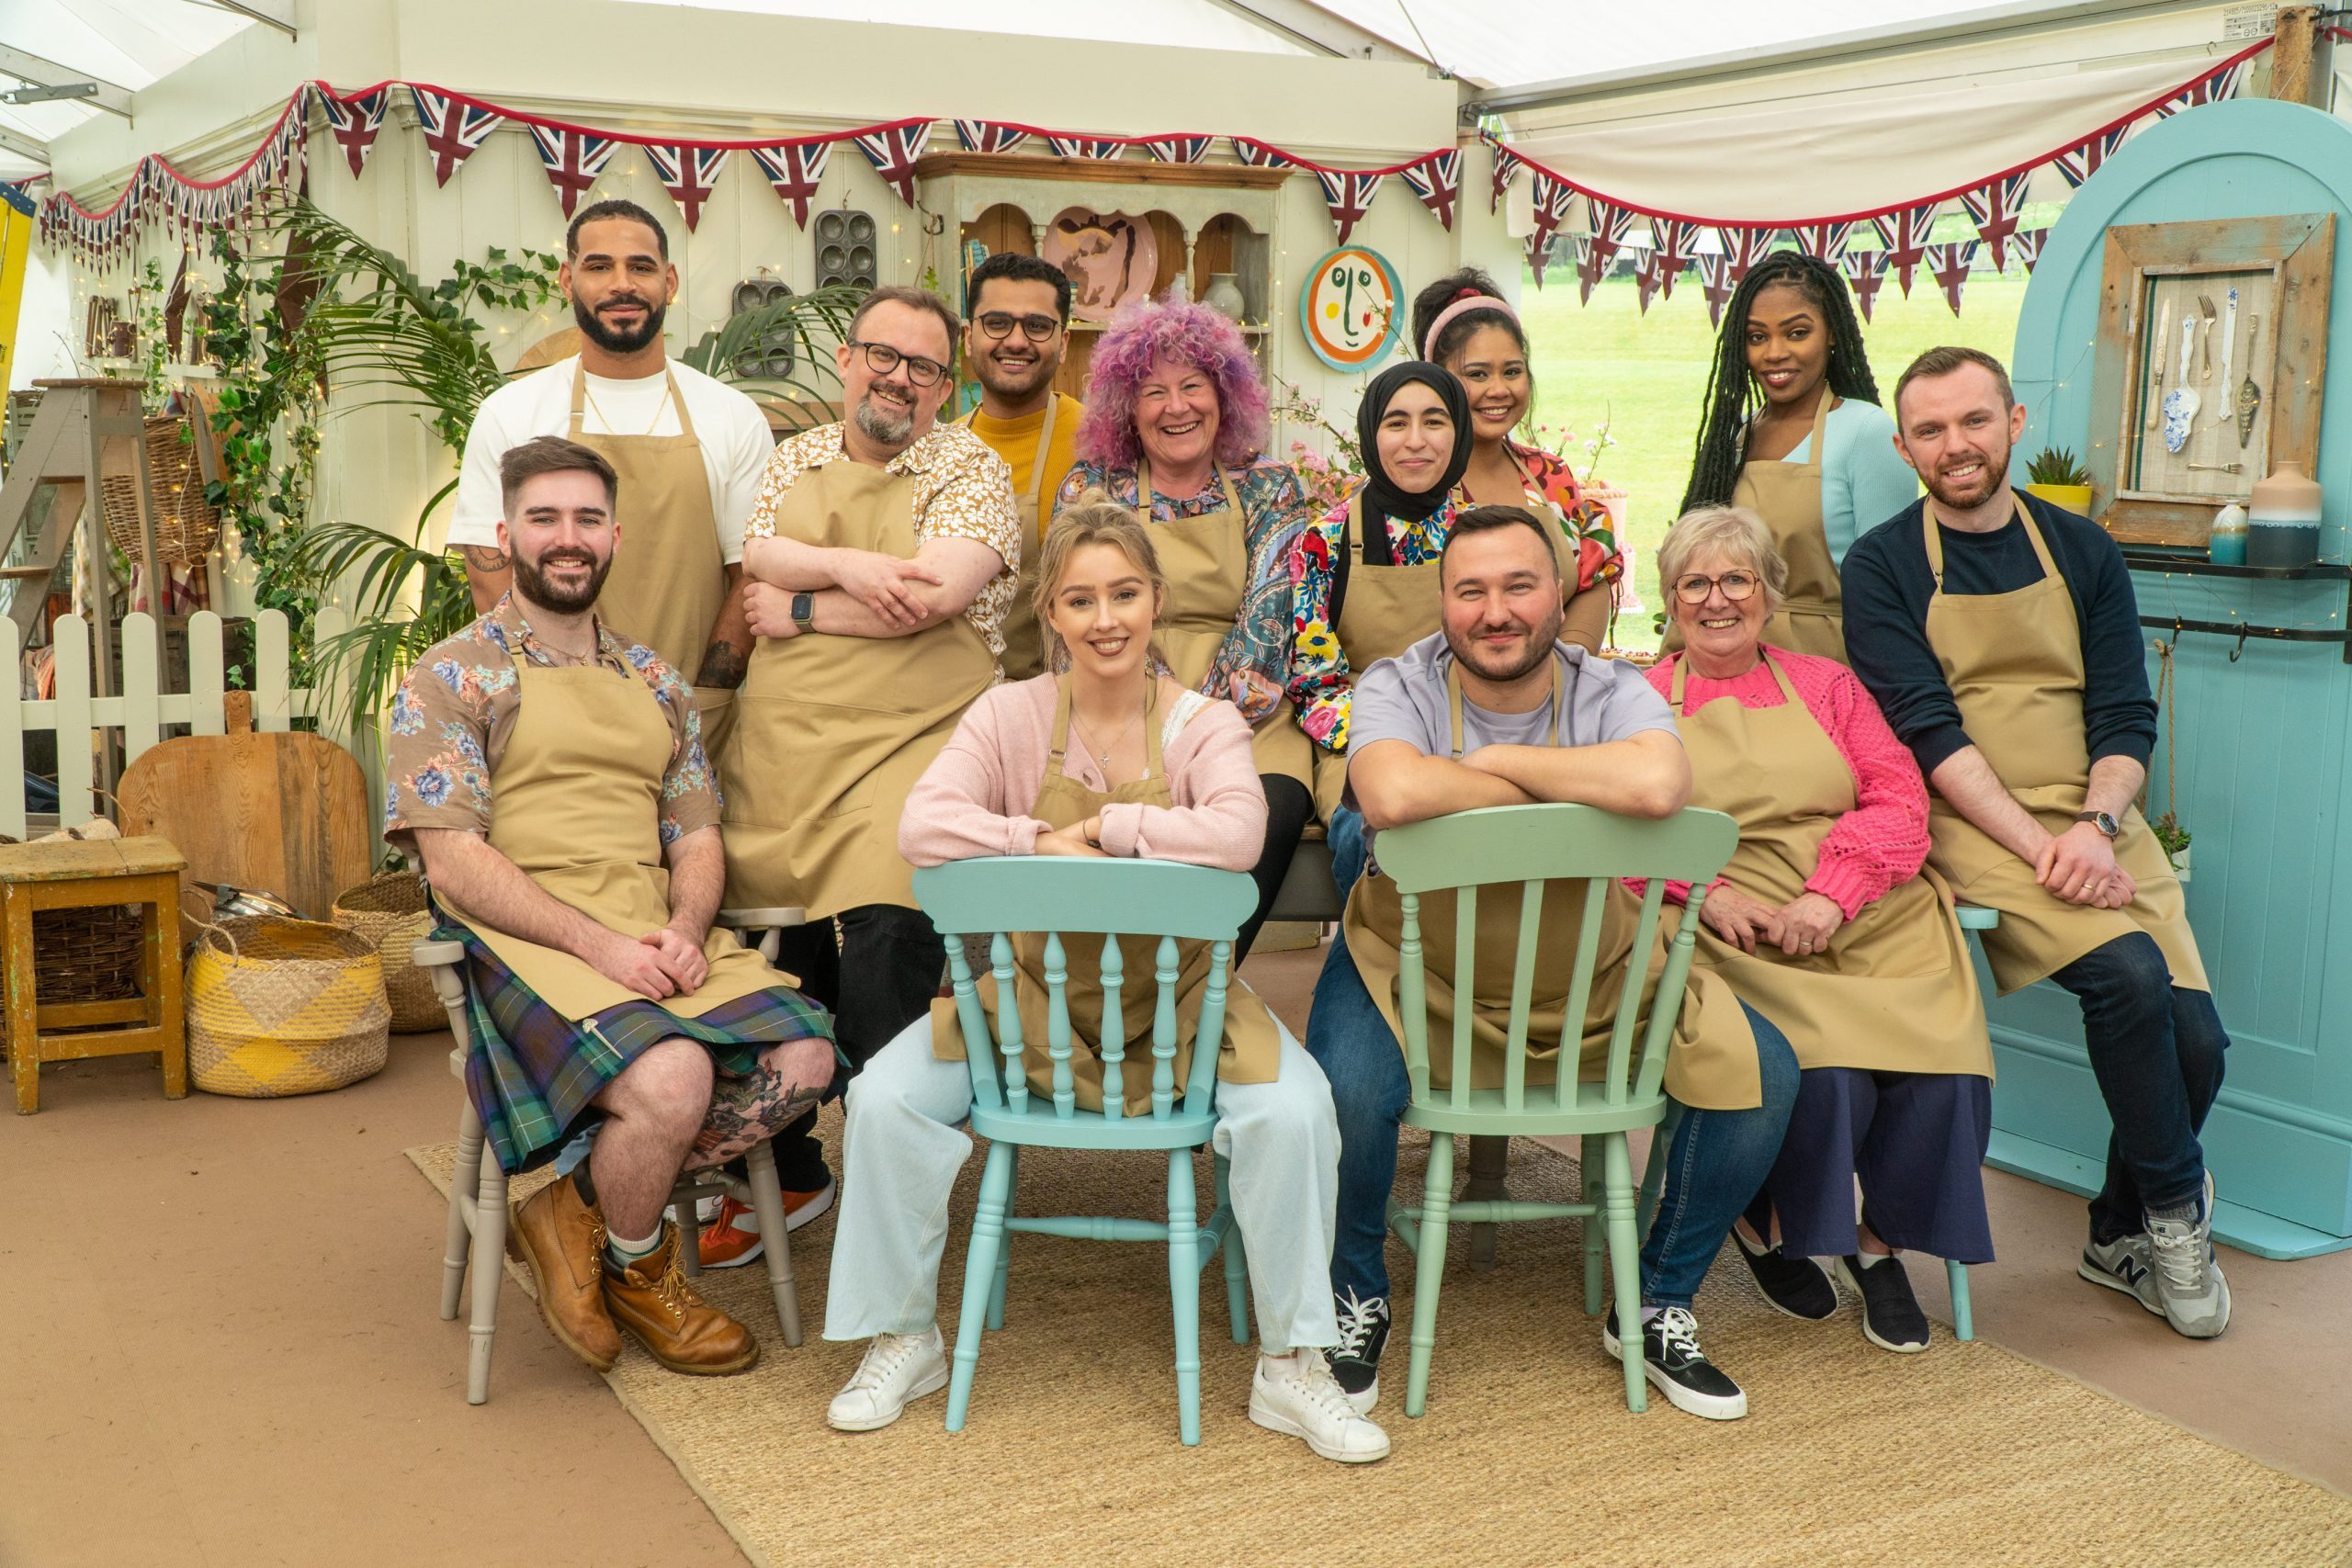 https://www.tasteofhome.com/wp-content/uploads/2020/09/74086_S6_The-Great-British-Bake-Off-S6-17-scaled.jpg